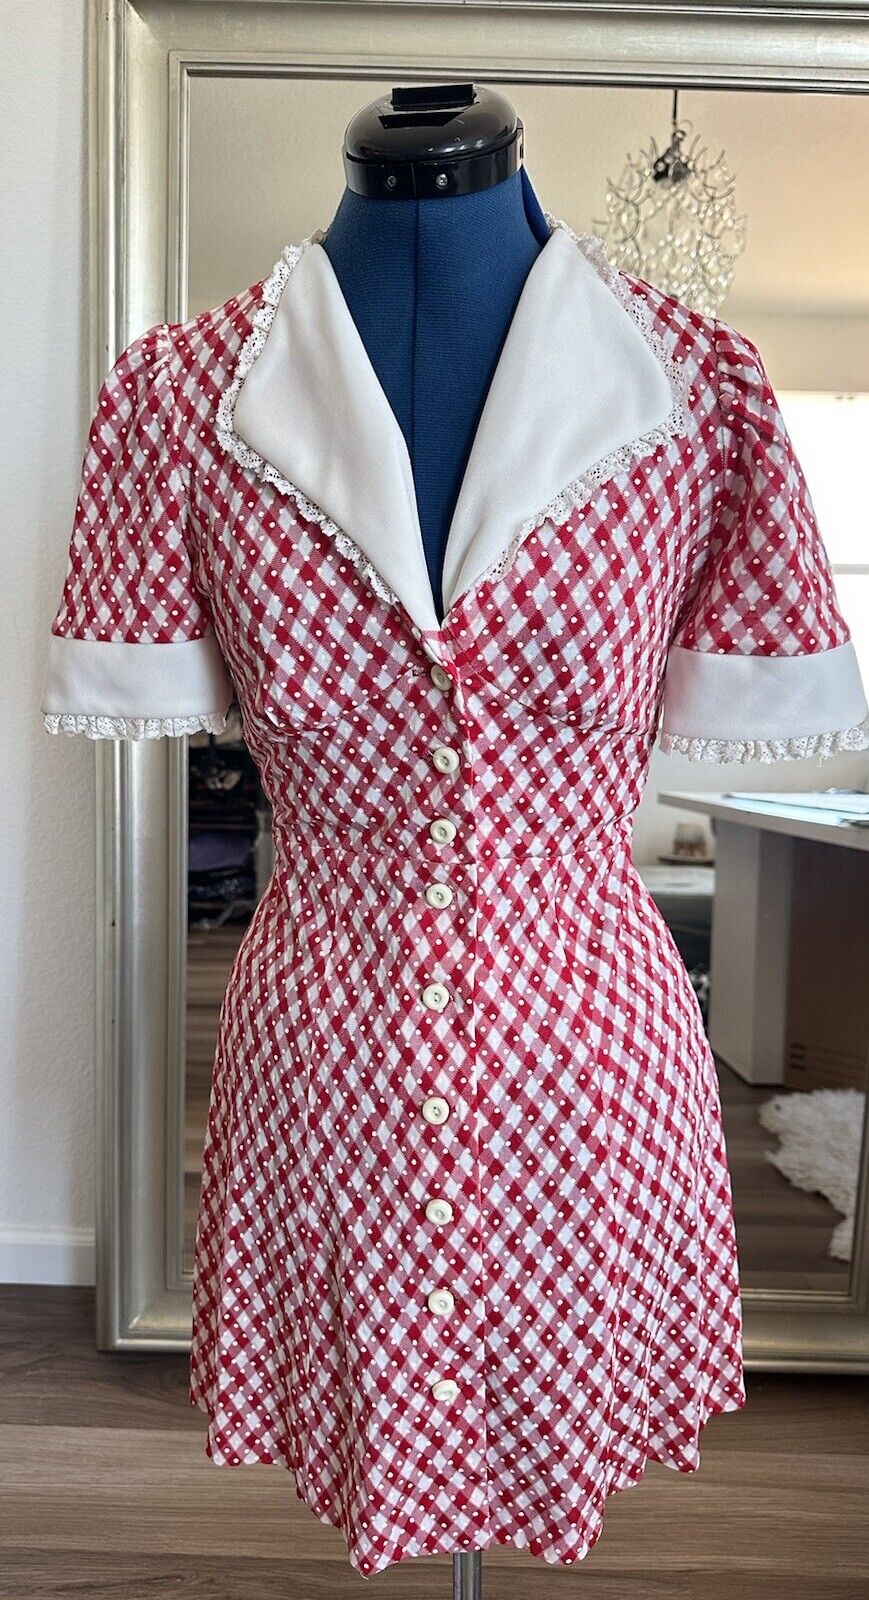 Vintage 60s Red & White Lace Collar Button Down Gingham ILGWU Dress